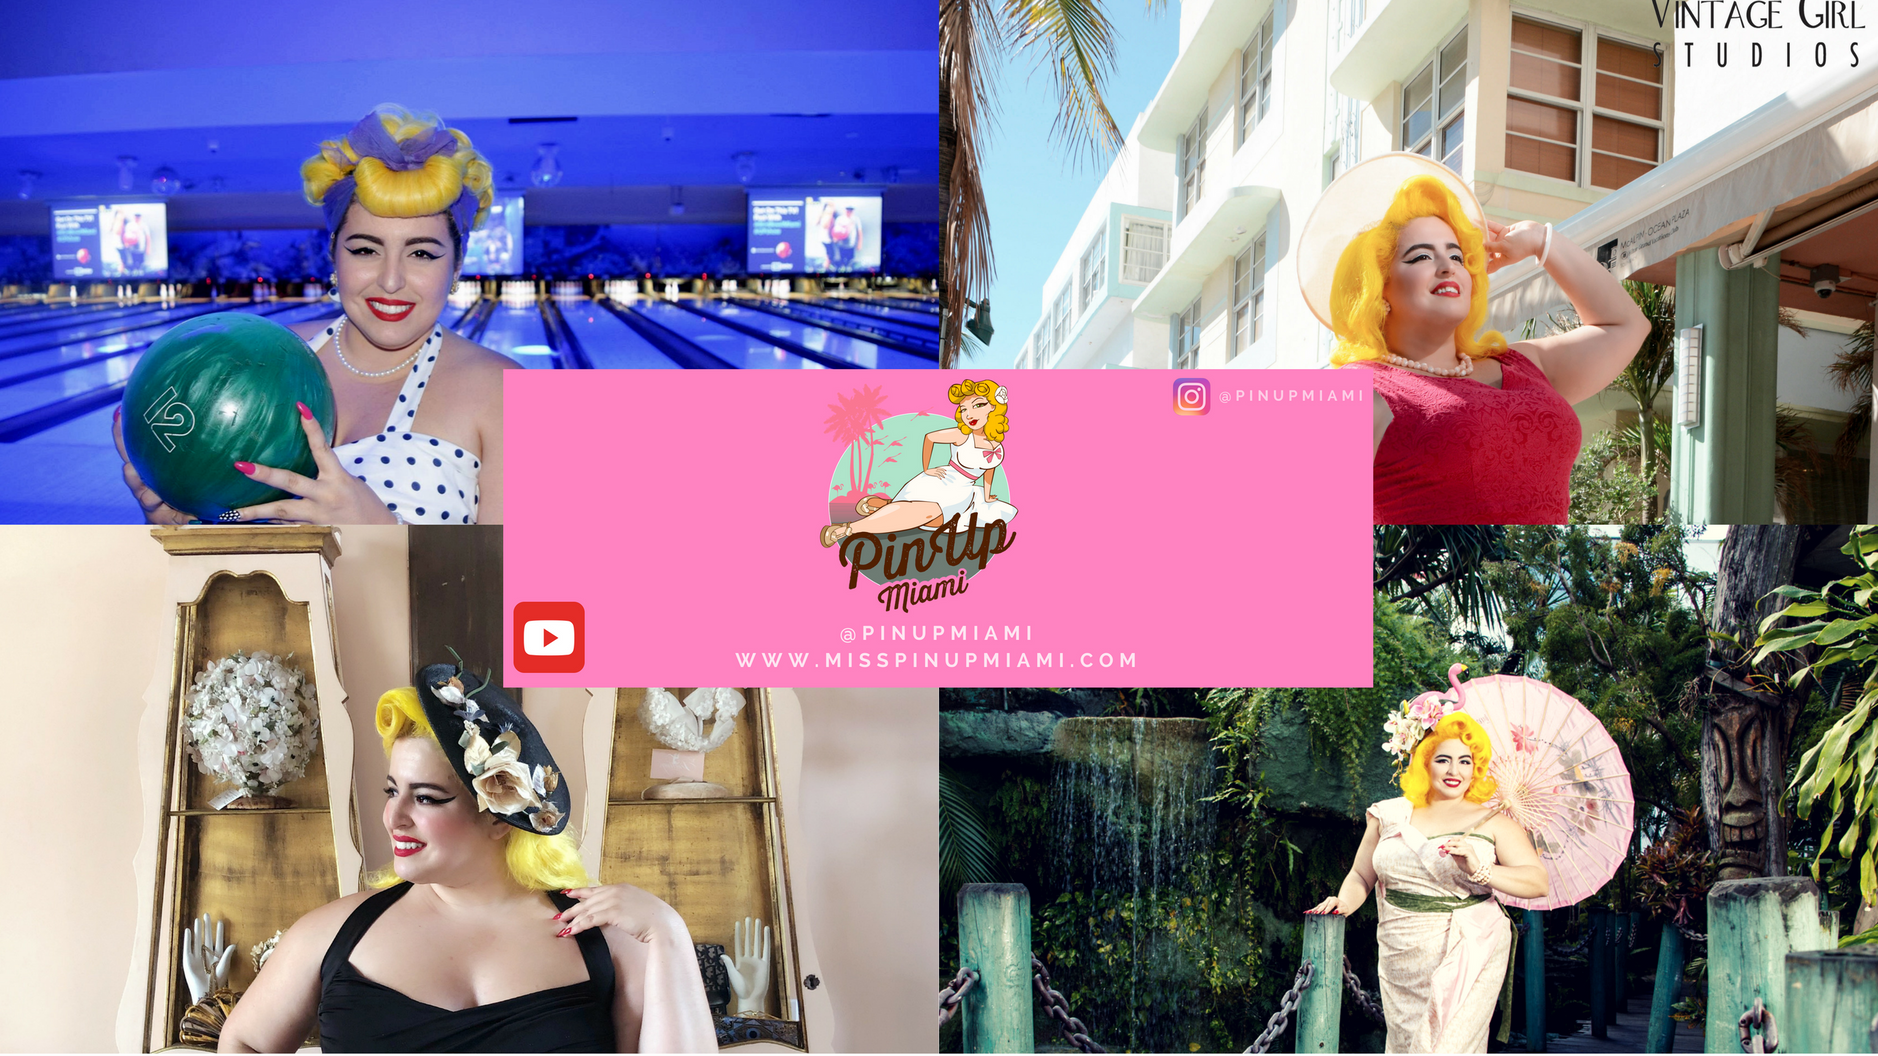 PinUp Miami YouTube Channel